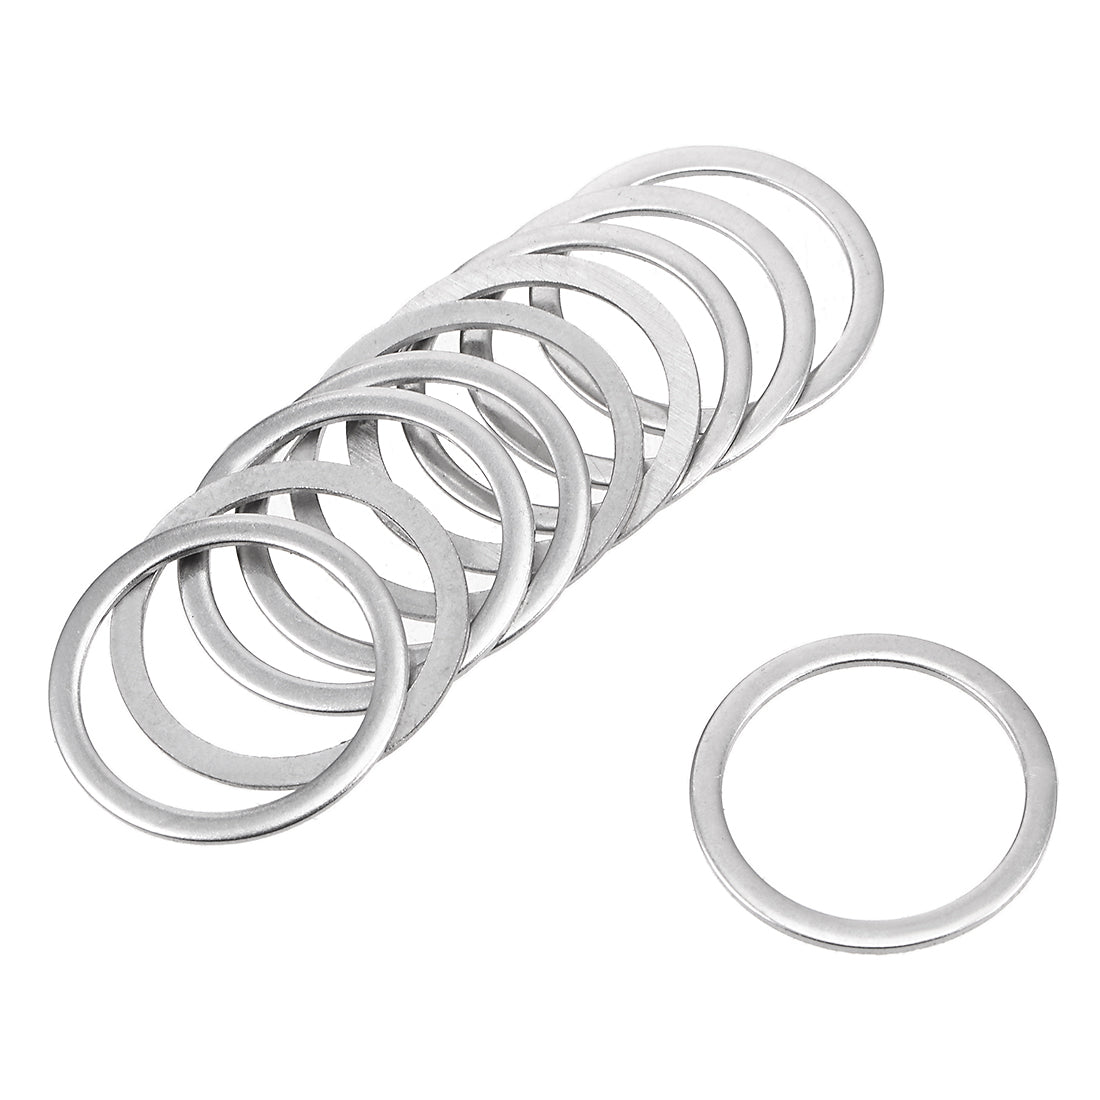 uxcell Uxcell 50 Pcs 14mm x 20mm x 0.8mm 304 Stainless Steel Flat Washer for Screw Bolt